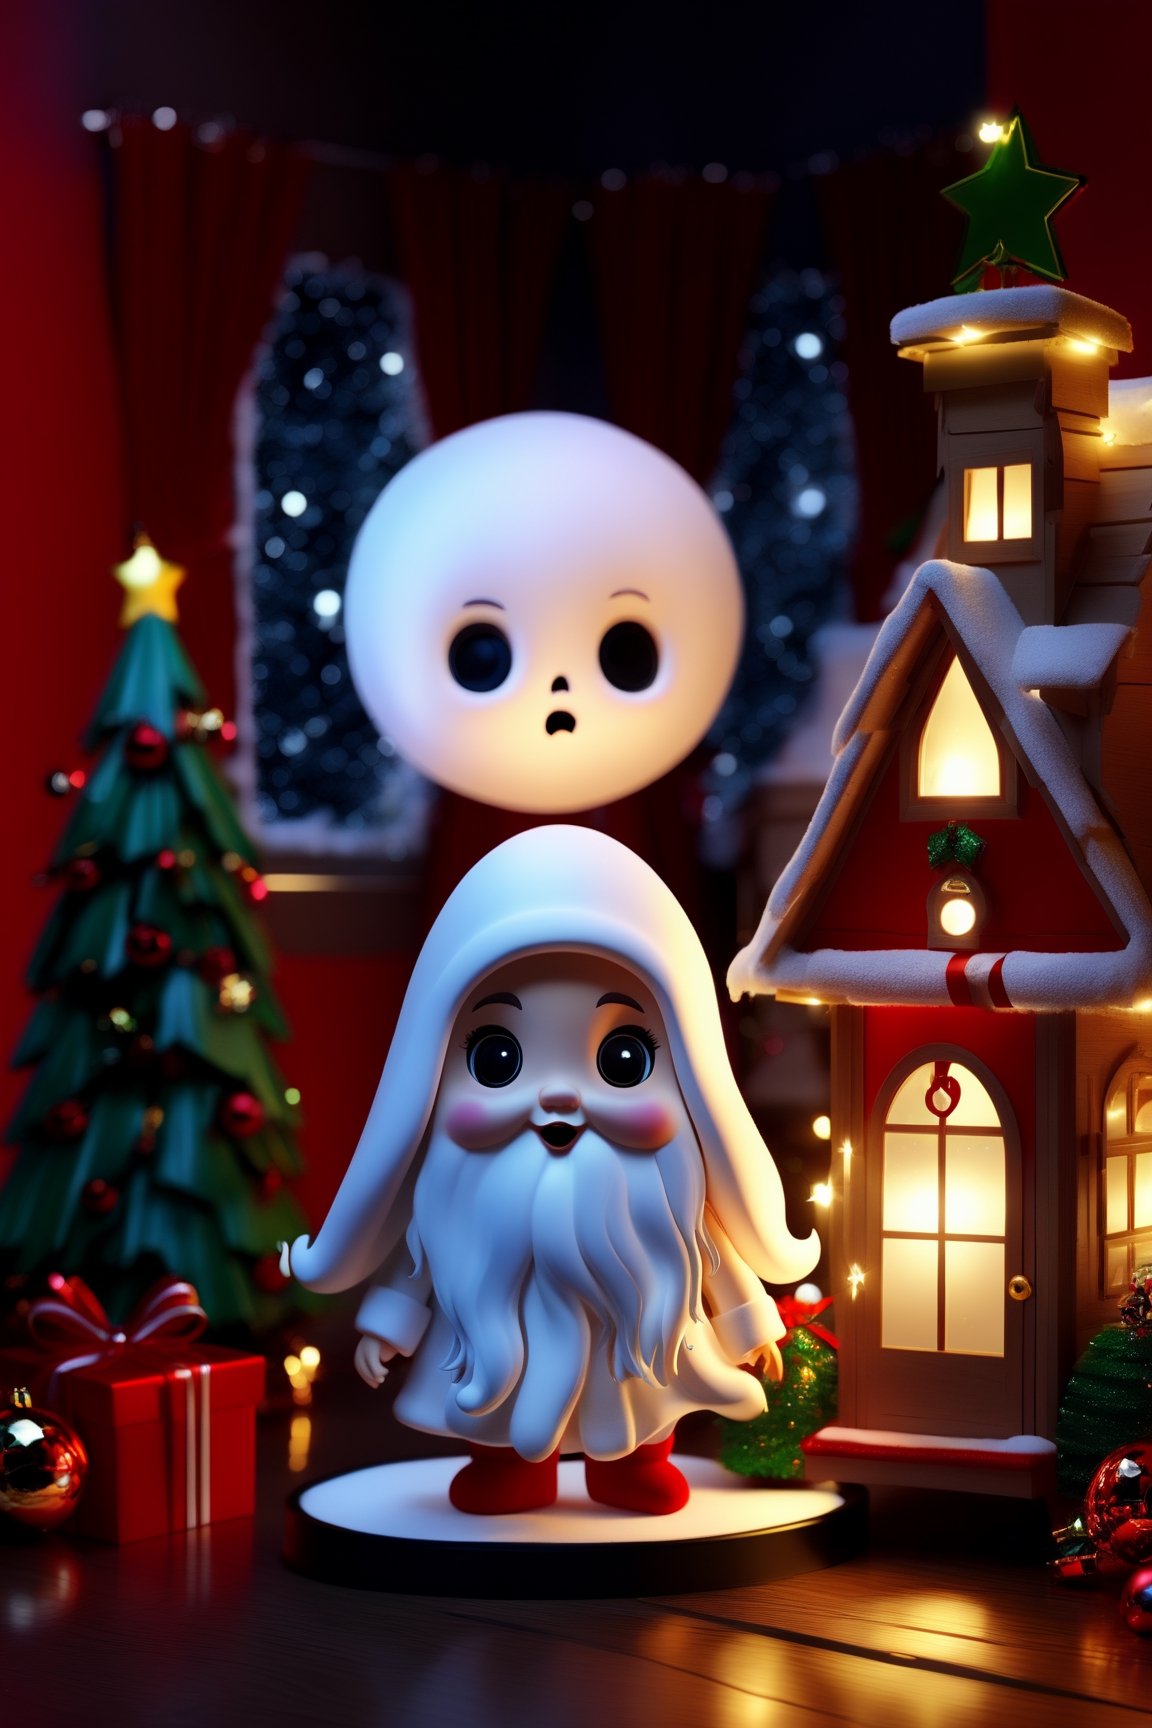 ((Best Quality, 8K, Masterpiece: 1.4)),((stunning detail: 1.3)),((Illustration: 1.2)),((high resolution: 1.1)), Christmas House, Christmas Forest, Ghost from Christmas past Encounter, Christmas Doll, Shadows of Christmas Ghost, Christmas Dollhouse, Mirror, Santa Claus, Christmas Activity, Christmas  Spirits, Blight Moon,
2D Animated CG Movie style, Christmas theme, chibi emote style